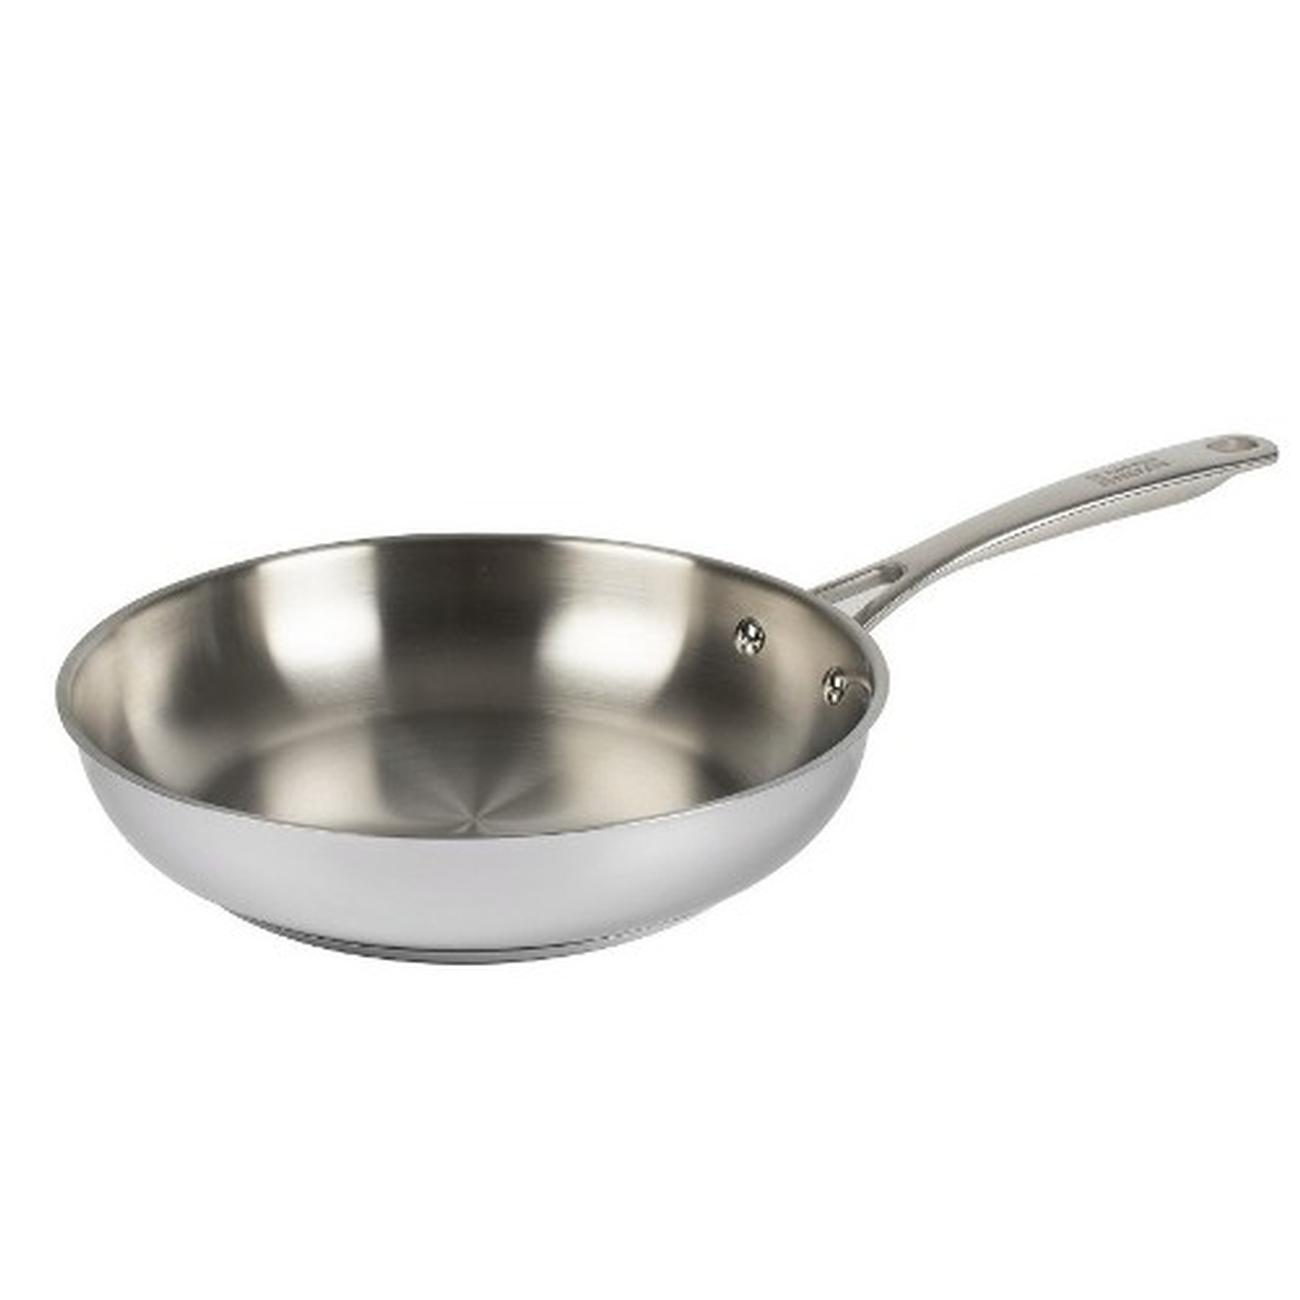 https://www.thekitchenwhisk.ie/contentfiles/productImages/Large/AllRoundFryingPan24cm.jpg